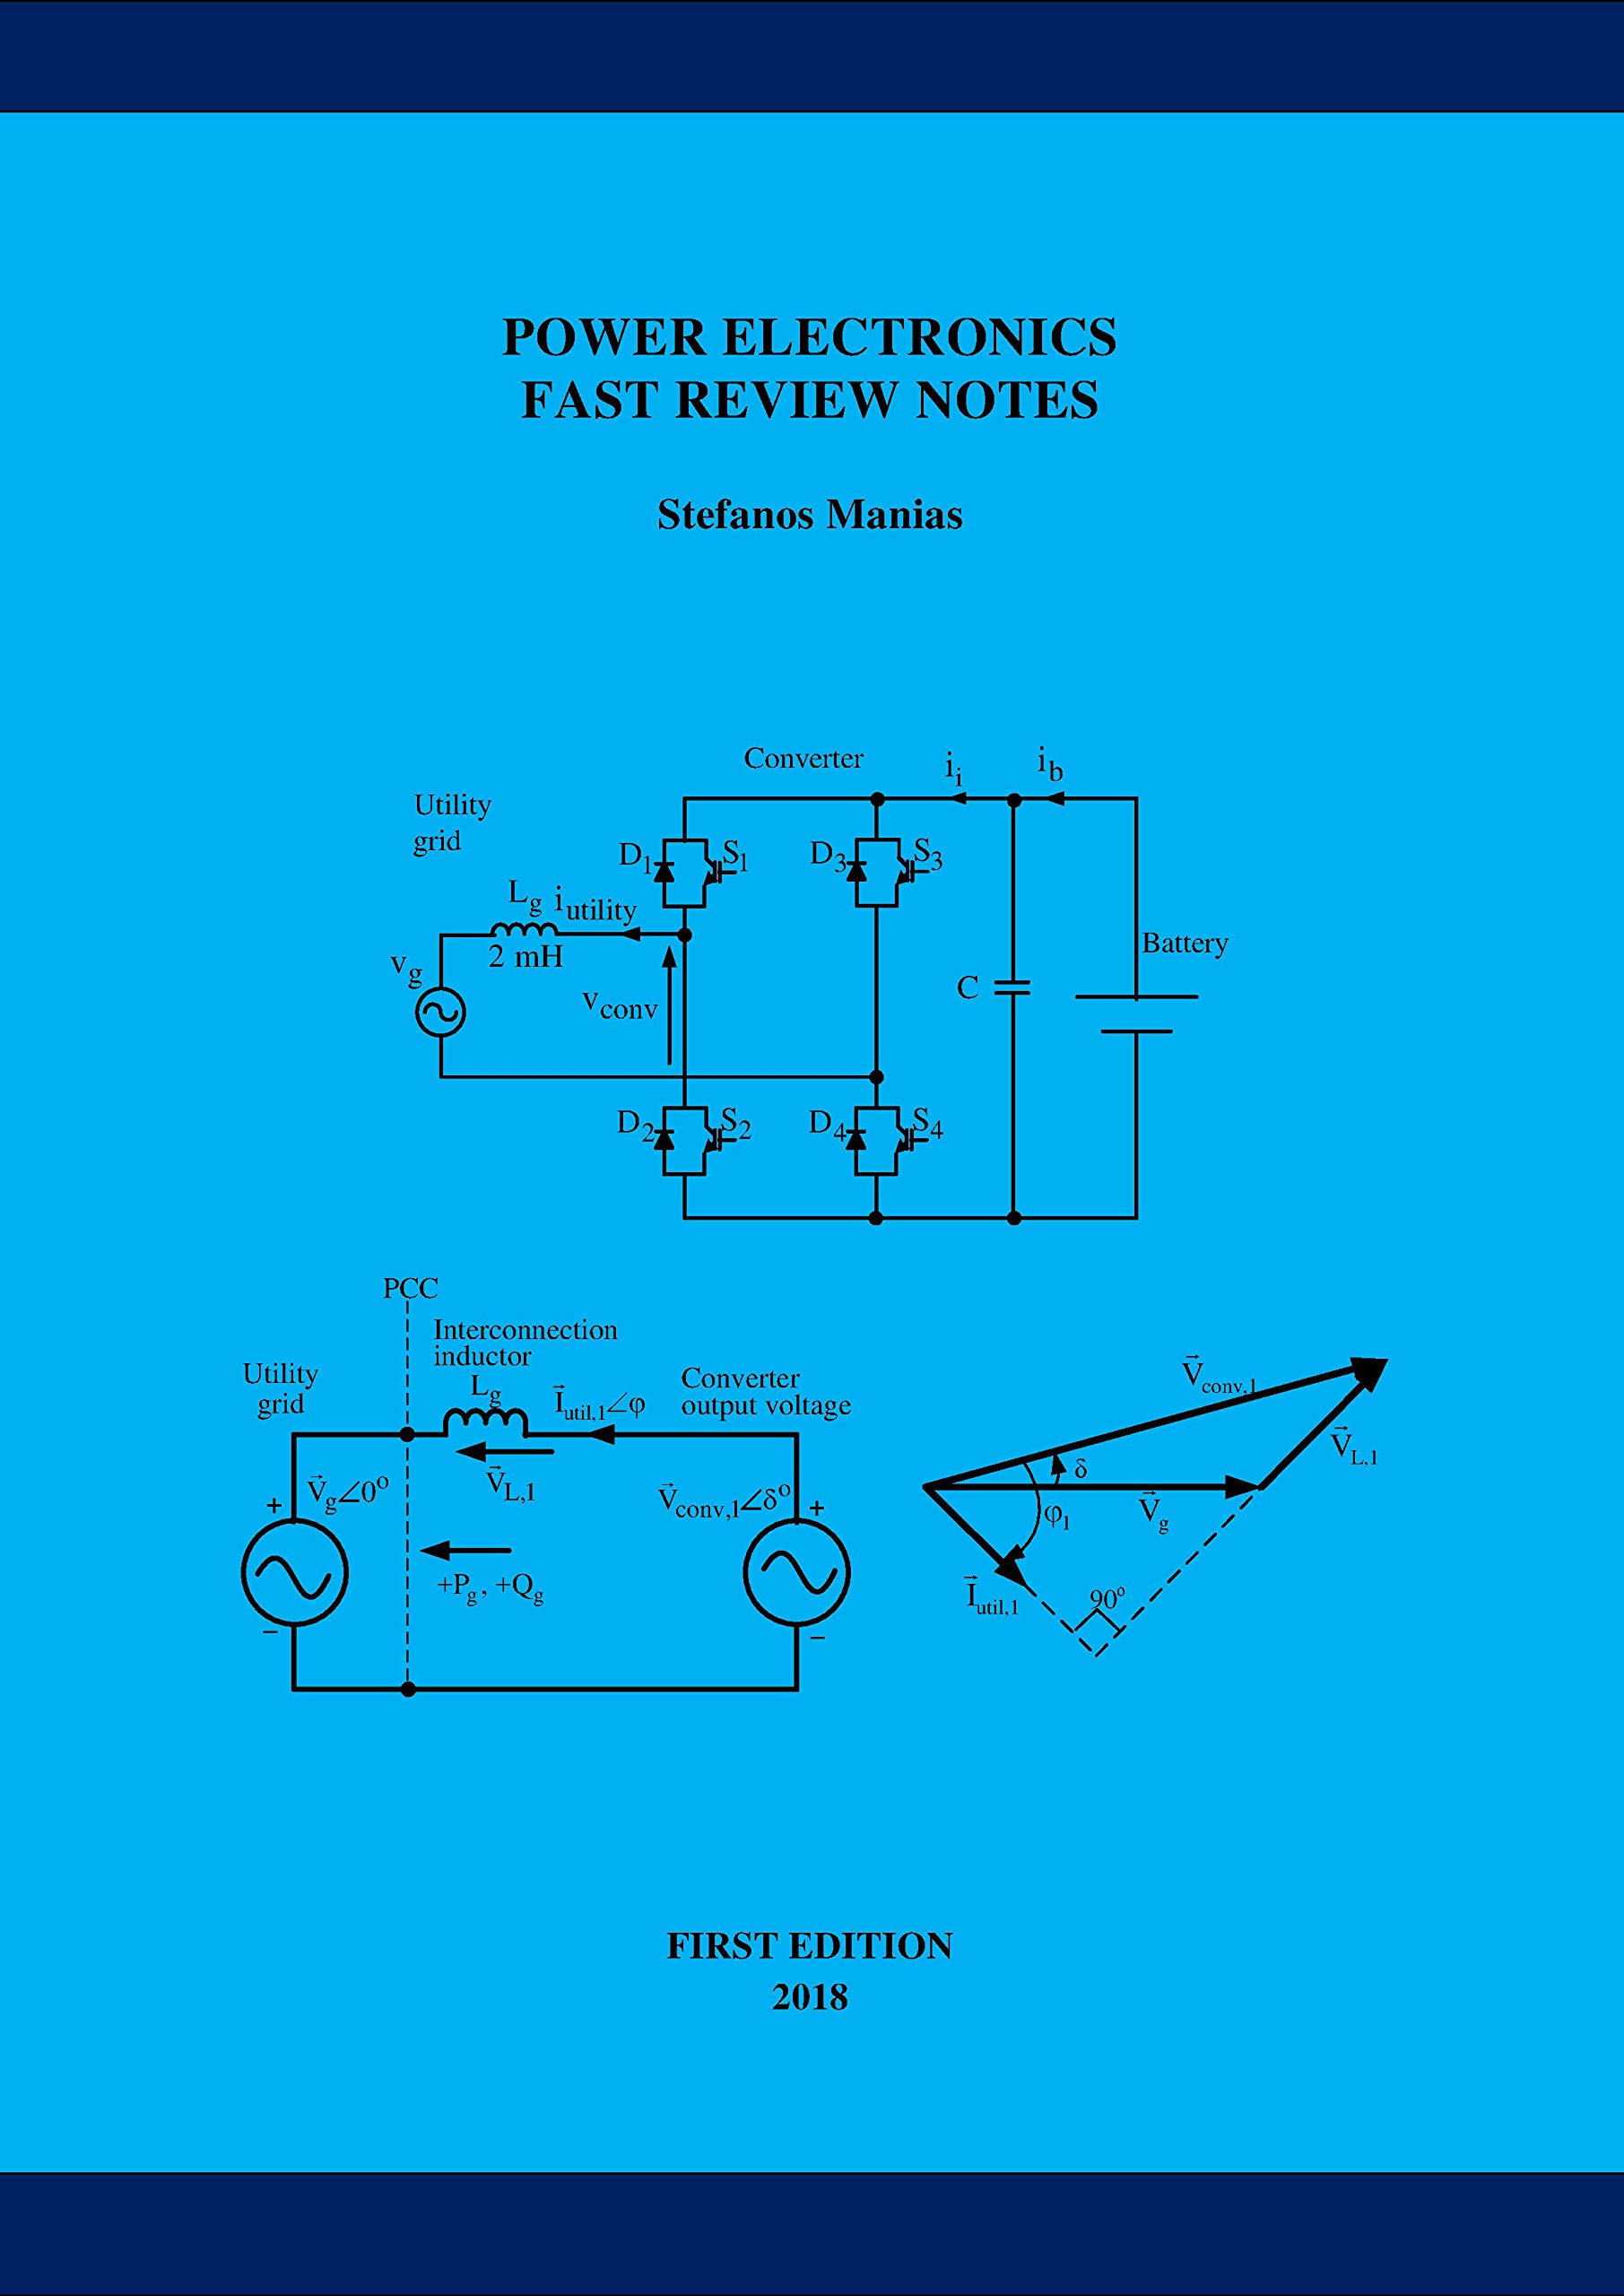 POWER ELECTRONICS FAST REVIEW NOTES